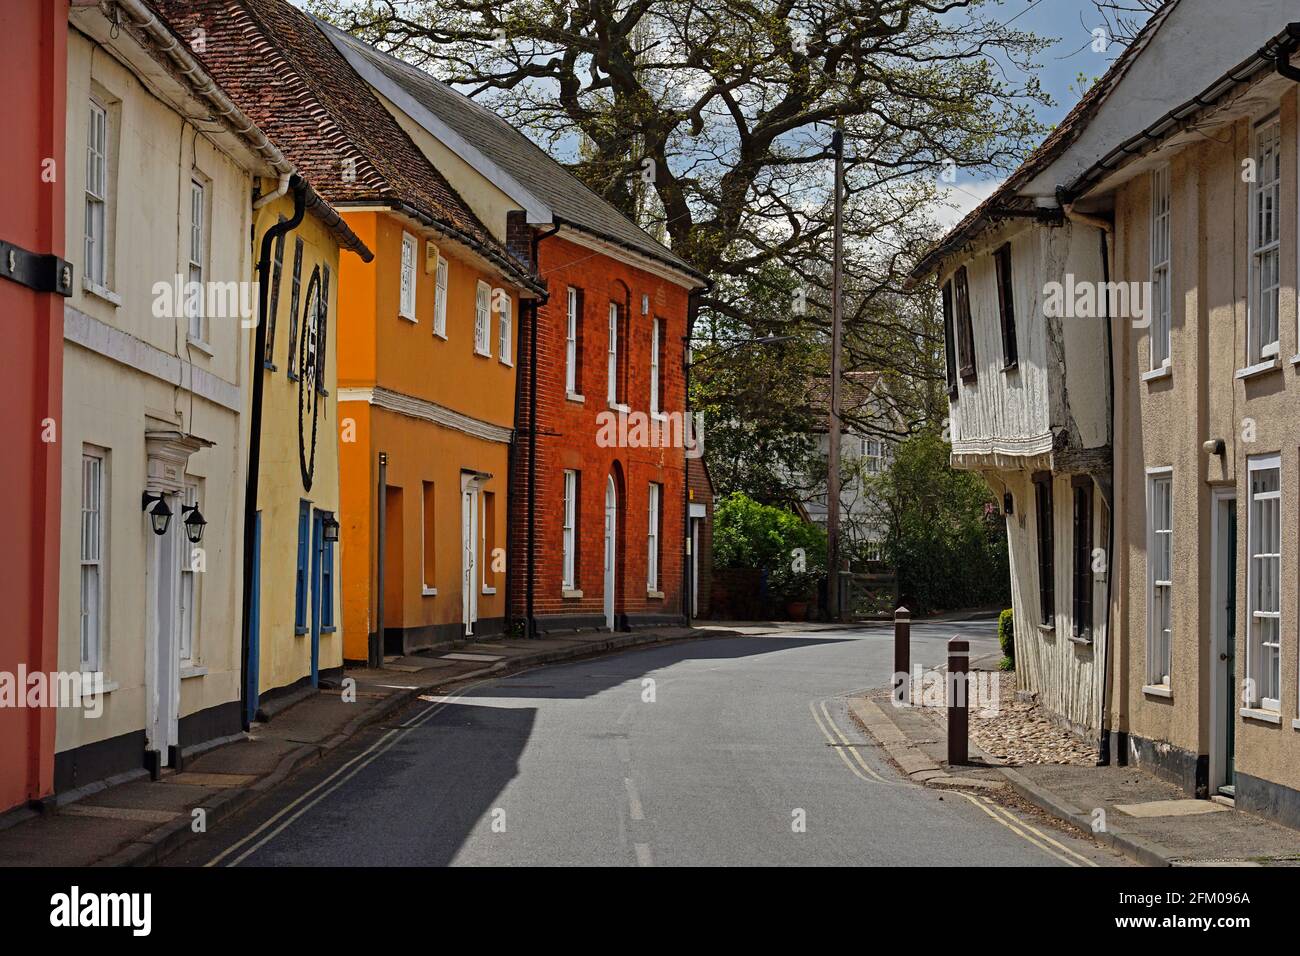 Timber framed colourful houses in village of Nayland,Suffolk,England Stock Photo